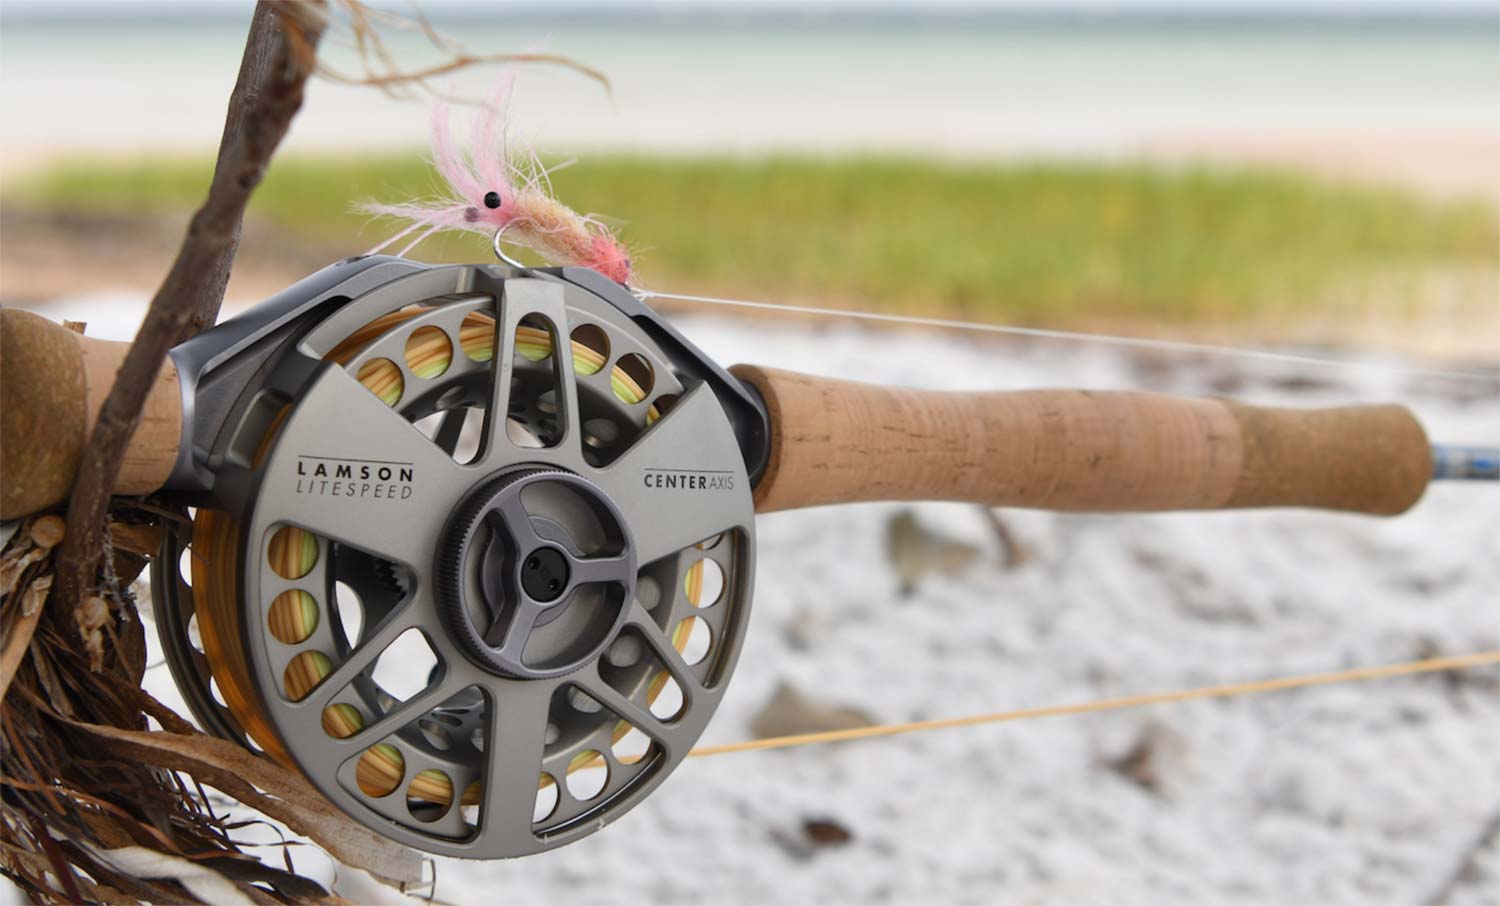 New Fly Rods And Reels From Waterworks Lamson: Video - Fly Fishing, Gink  and Gasoline, How to Fly Fish, Trout Fishing, Fly Tying